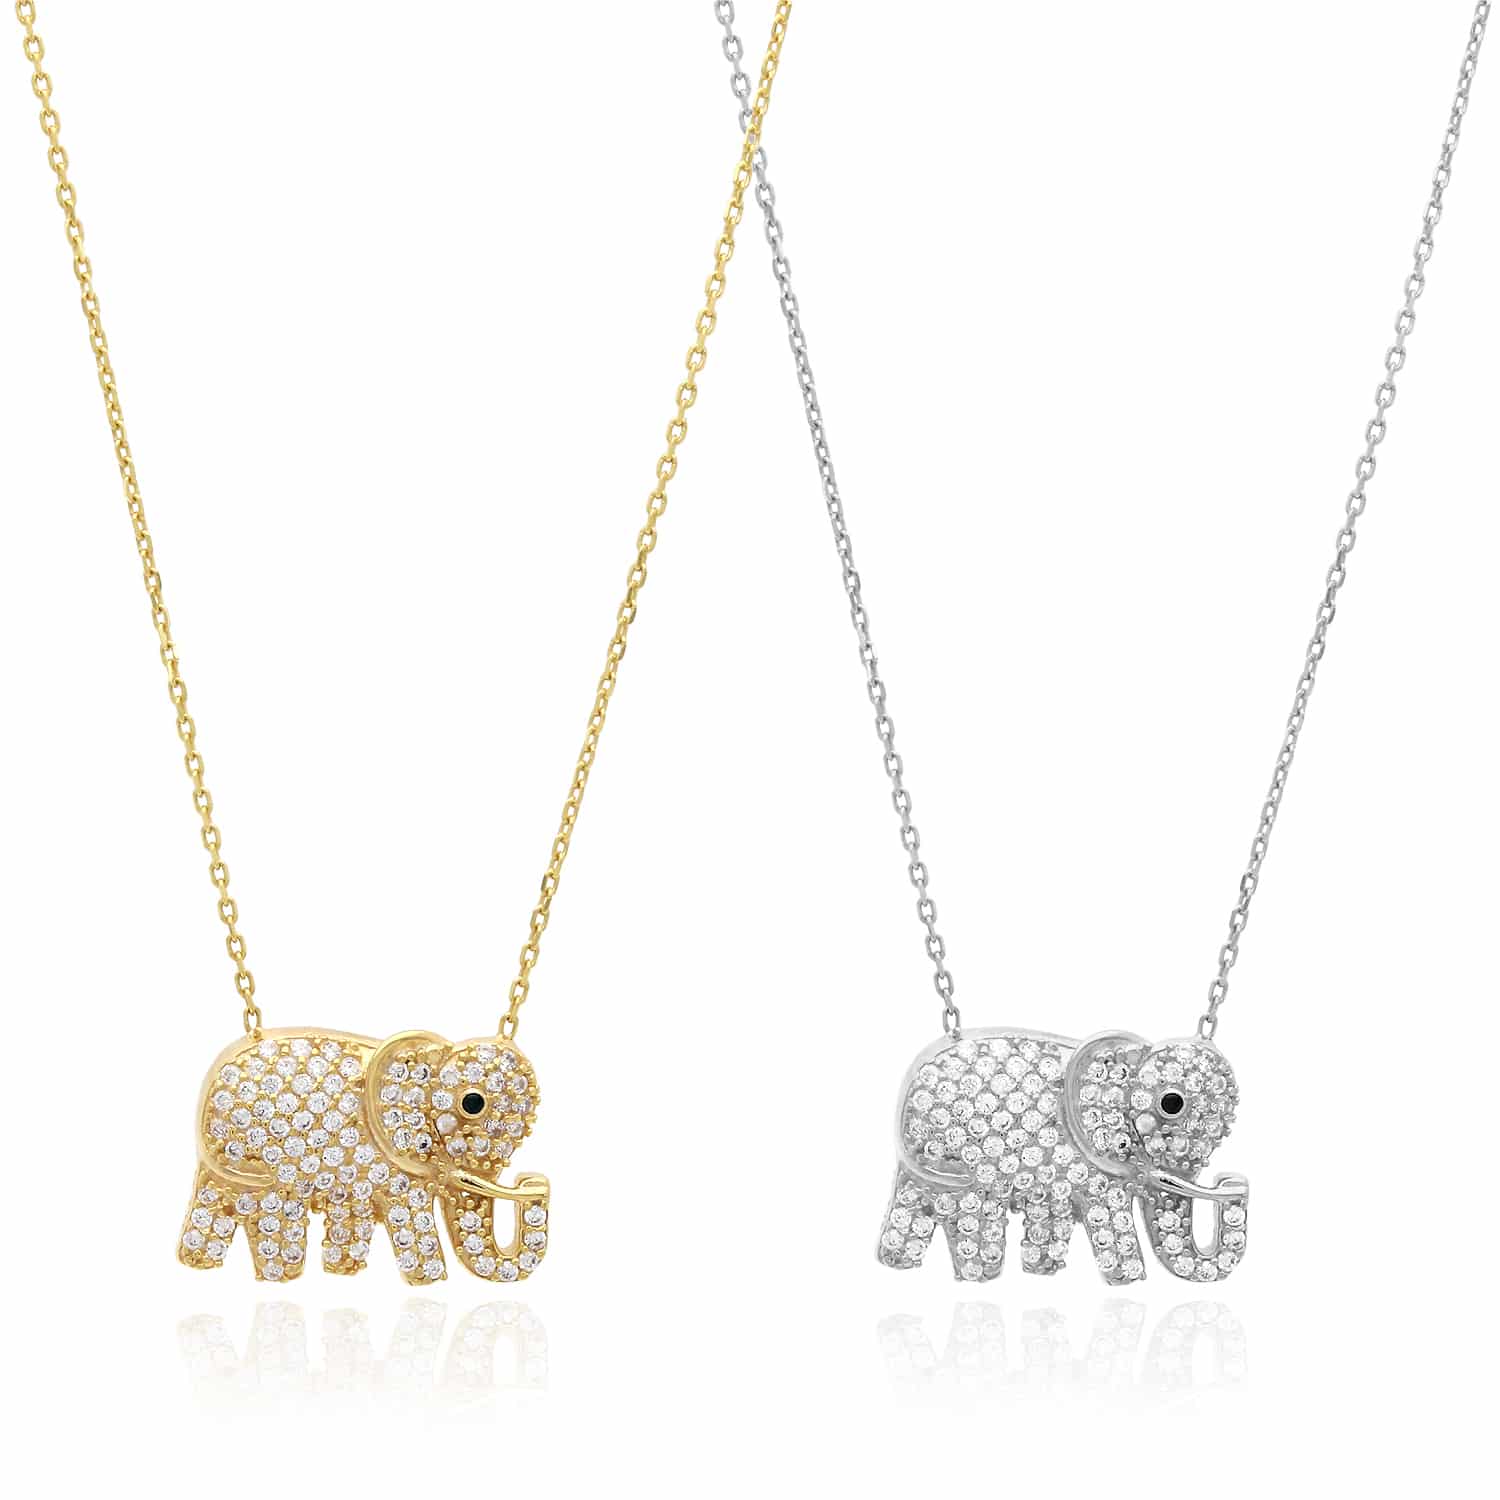 18K Gold Over Silver Simulated Diamond Elephant Pendant Necklace 16"-17.5" Adjus - Yellow Gold Plated